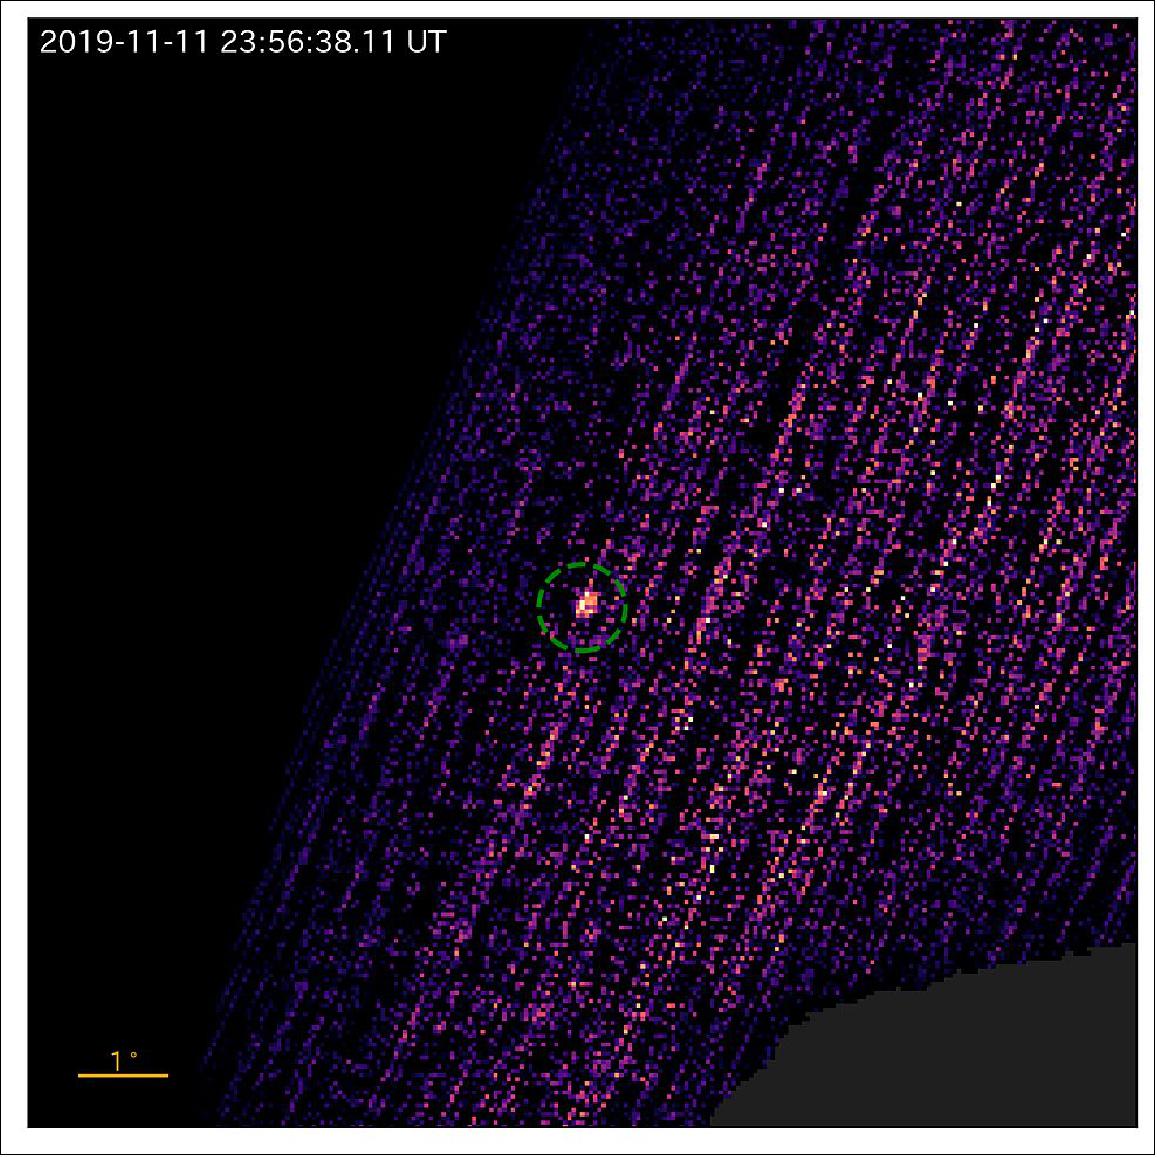 Figure 40: This image shows the X-ray outburst from the black hole MAXI J0637-043, detected by the REXIS instrument on NASA's OSIRIS-REx spacecraft. The image was constructed using data collected by the X-ray spectrometer while REXIS was making observations of the space around asteroid Bennu on Nov. 11, 2019. The outburst is visible in the center of the image, and the image is overlaid with the limb of Bennu (lower right) to illustrate REXIS’s field of view (image credit: NASA/Goddard/University of Arizona/MIT/Harvard)